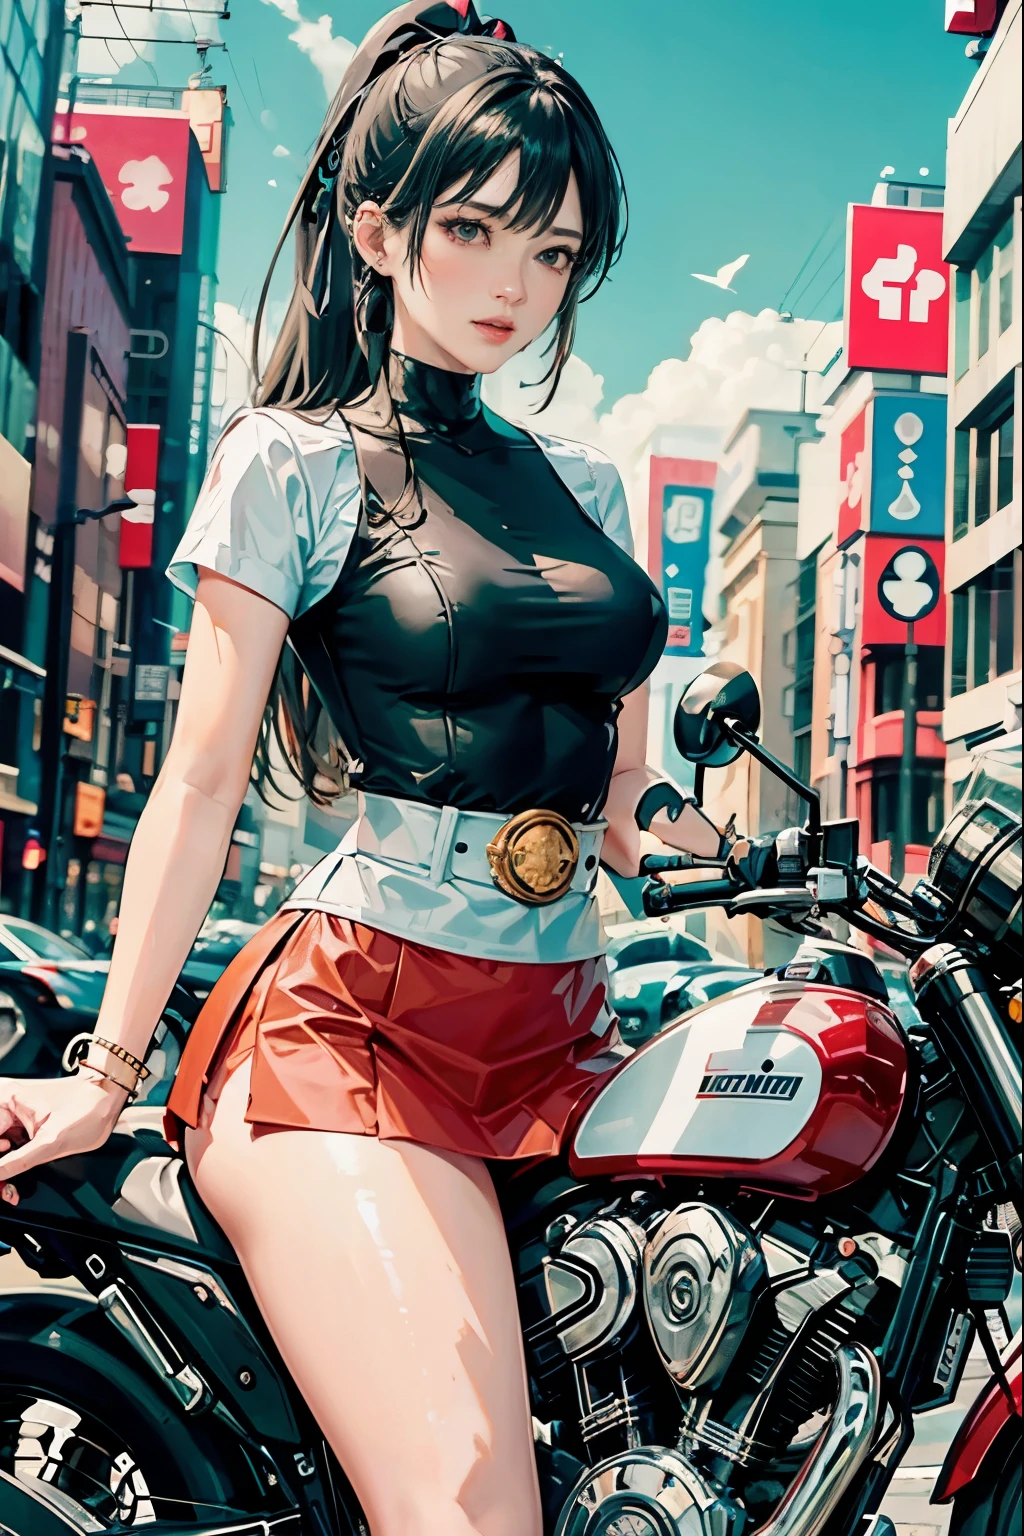 Japan riding a bike,The miniskirt is turning up、white panties、ponytail、beautiful thighs、her knees are up、I can see white pants.、Beautiful panties、beautiful girl、beautiful woman、beautiful woman、lolicon hentai、Beautiful panties、beautiful thighs、beautiful girl、beautiful woman、Happy!!!, , motorcycle,[ realistic pictures ]!!, High resolution,